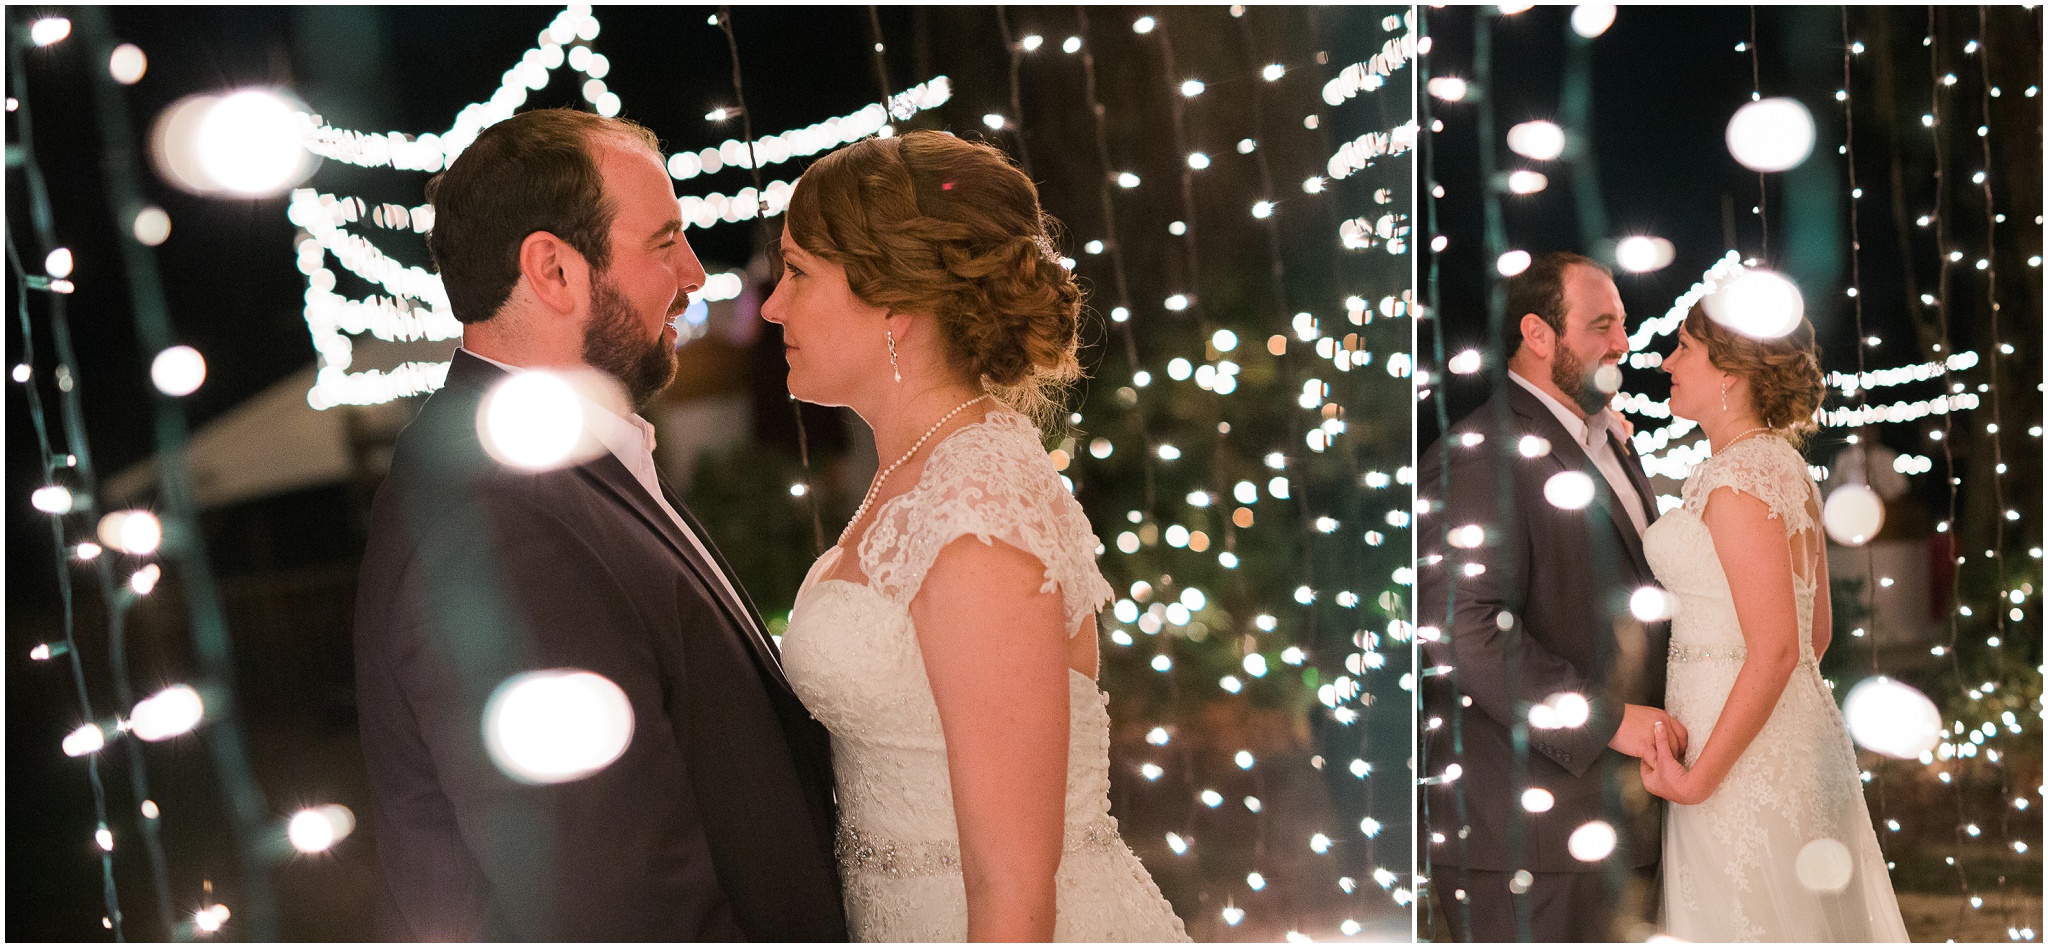 Paige and Dorsey looking into each others eyes surrounded by strands of lights that look like stars, Upper Mill Plantation Wedding Session 32, Conway, South Carolina, Wedding coordinator, flowers and Cake - Willow Event Designs, Venue - Upper Mill Plantation, DJ - Carolina Entertainment, Dress - Foxy Lady, www.onelifephoto.net Photography